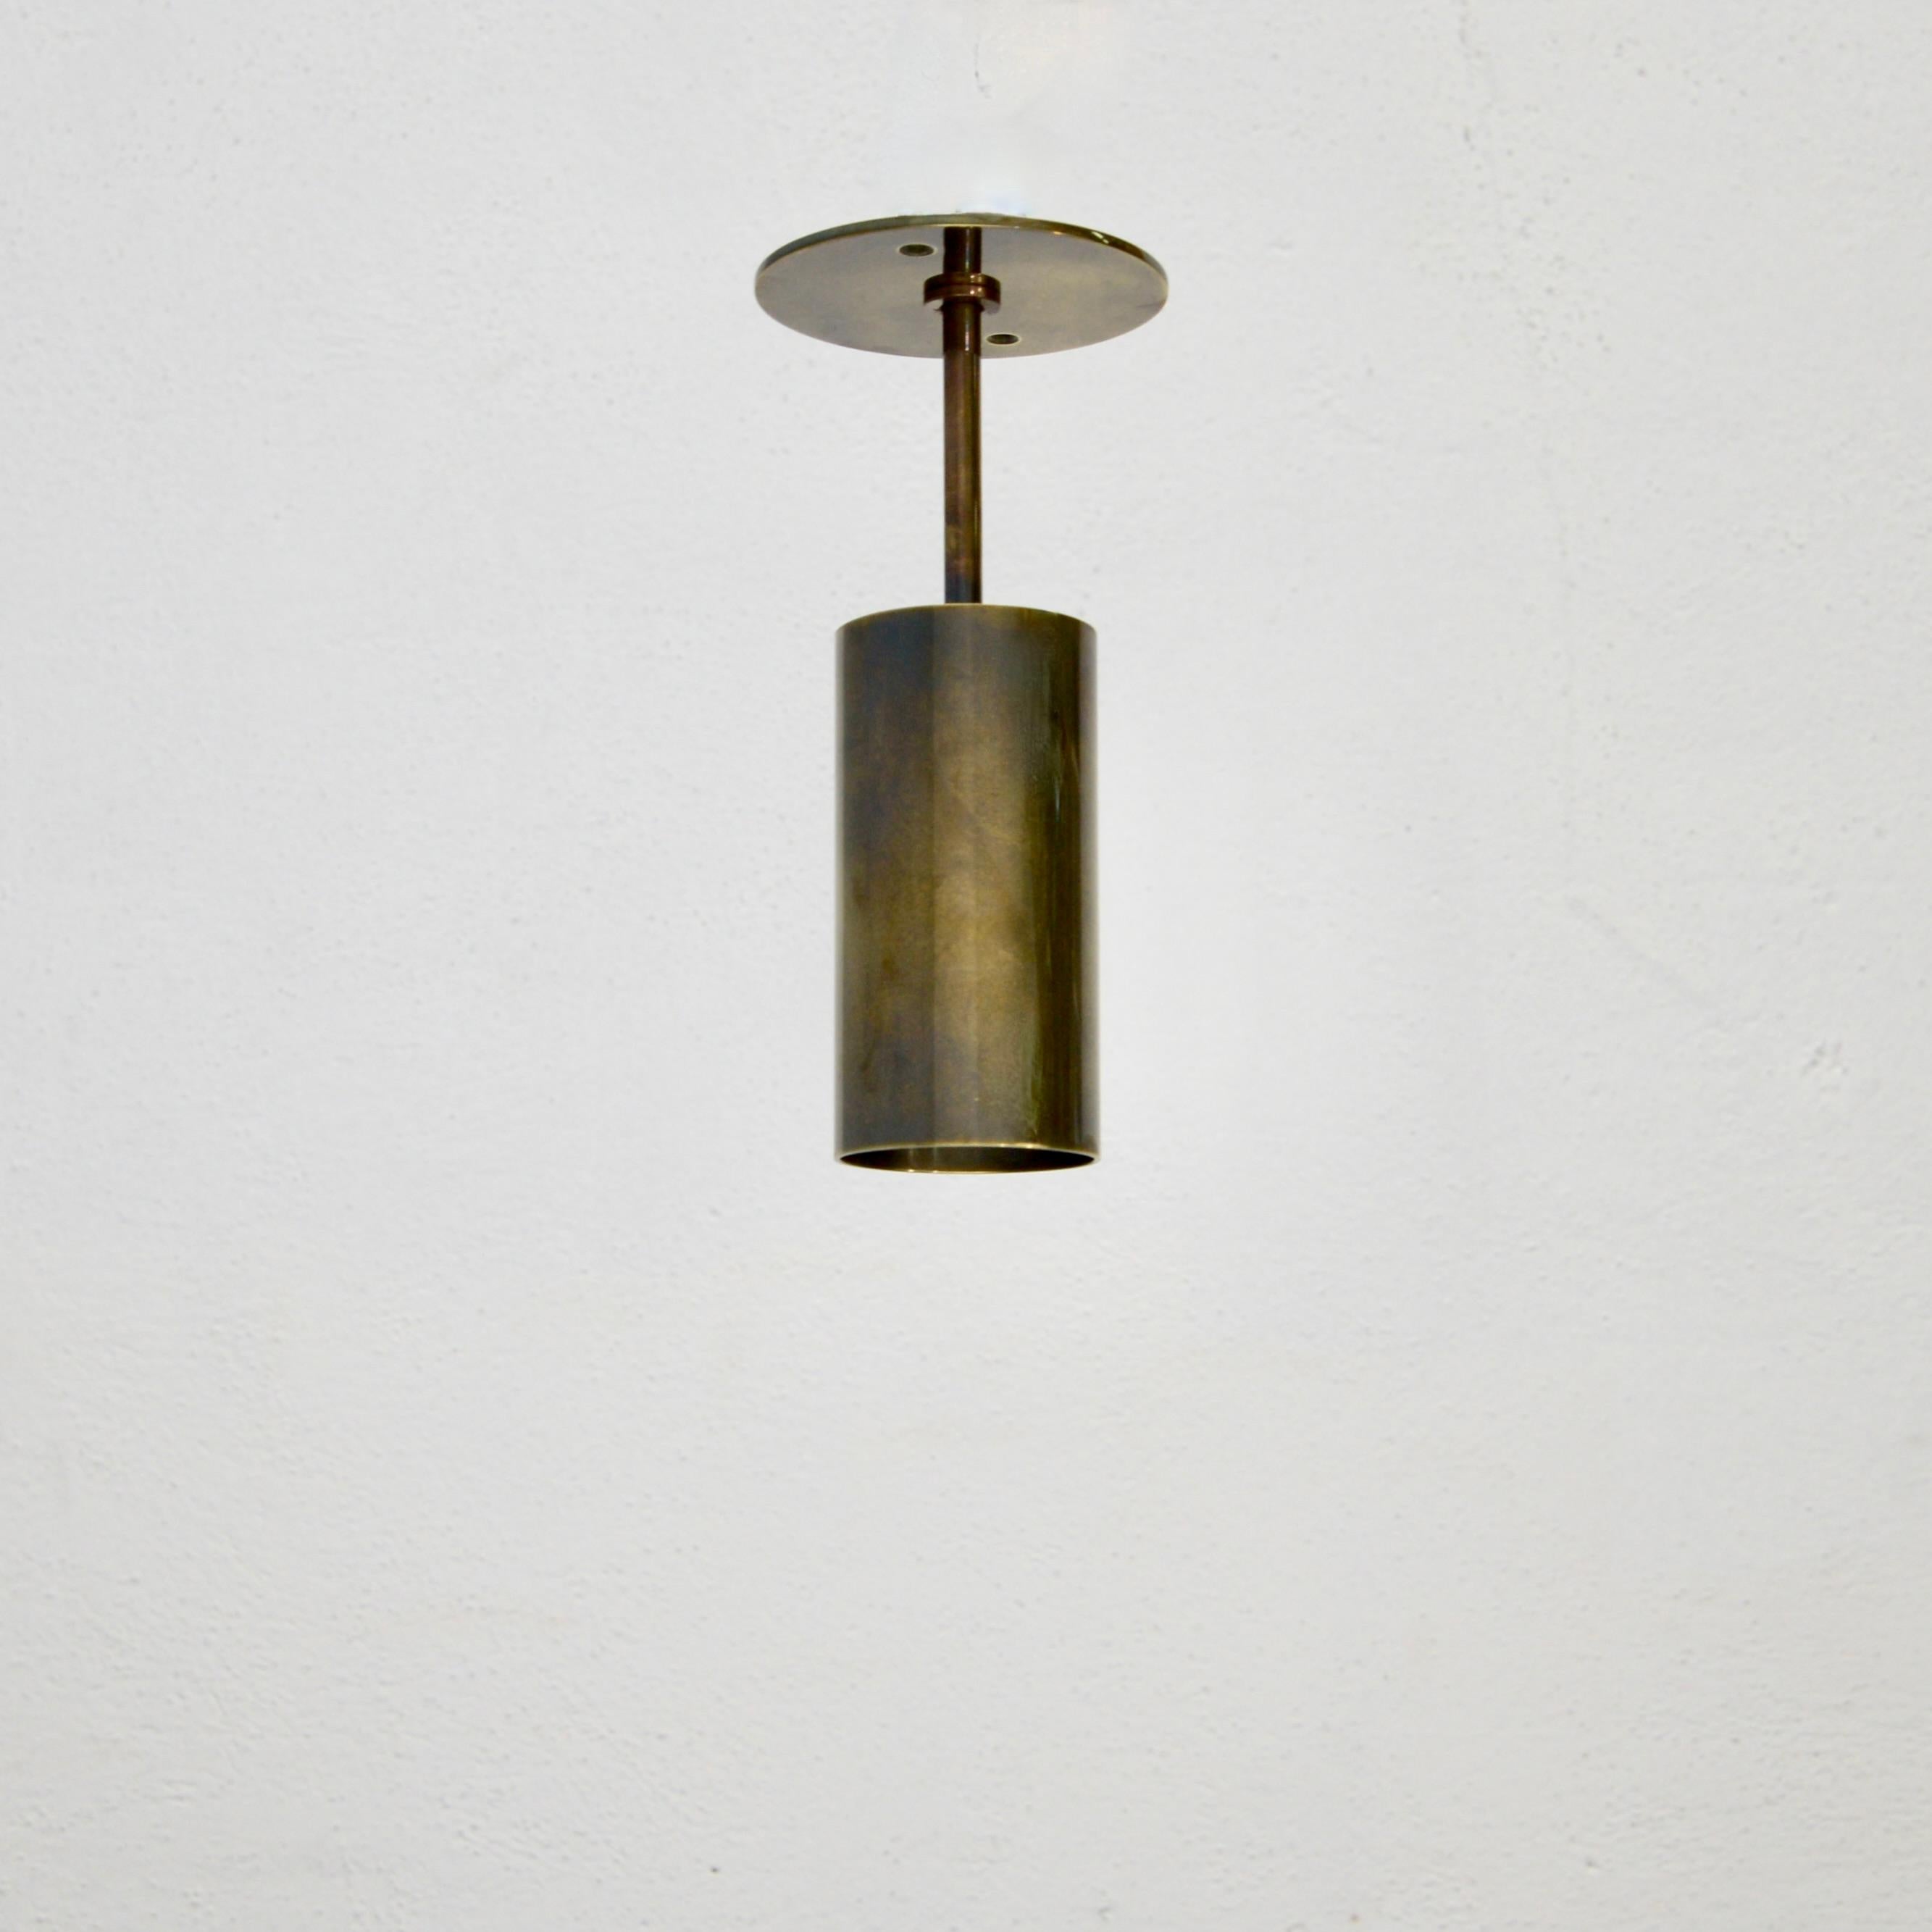 LUzpot is an elegant directional ceiling fixture inspired by classical mid century Italian design. This fixture has a thin stem and rotates and partially angles. Made in solid aged brass, aged nickel or chrome. Wired with 1-E26 medium based socket